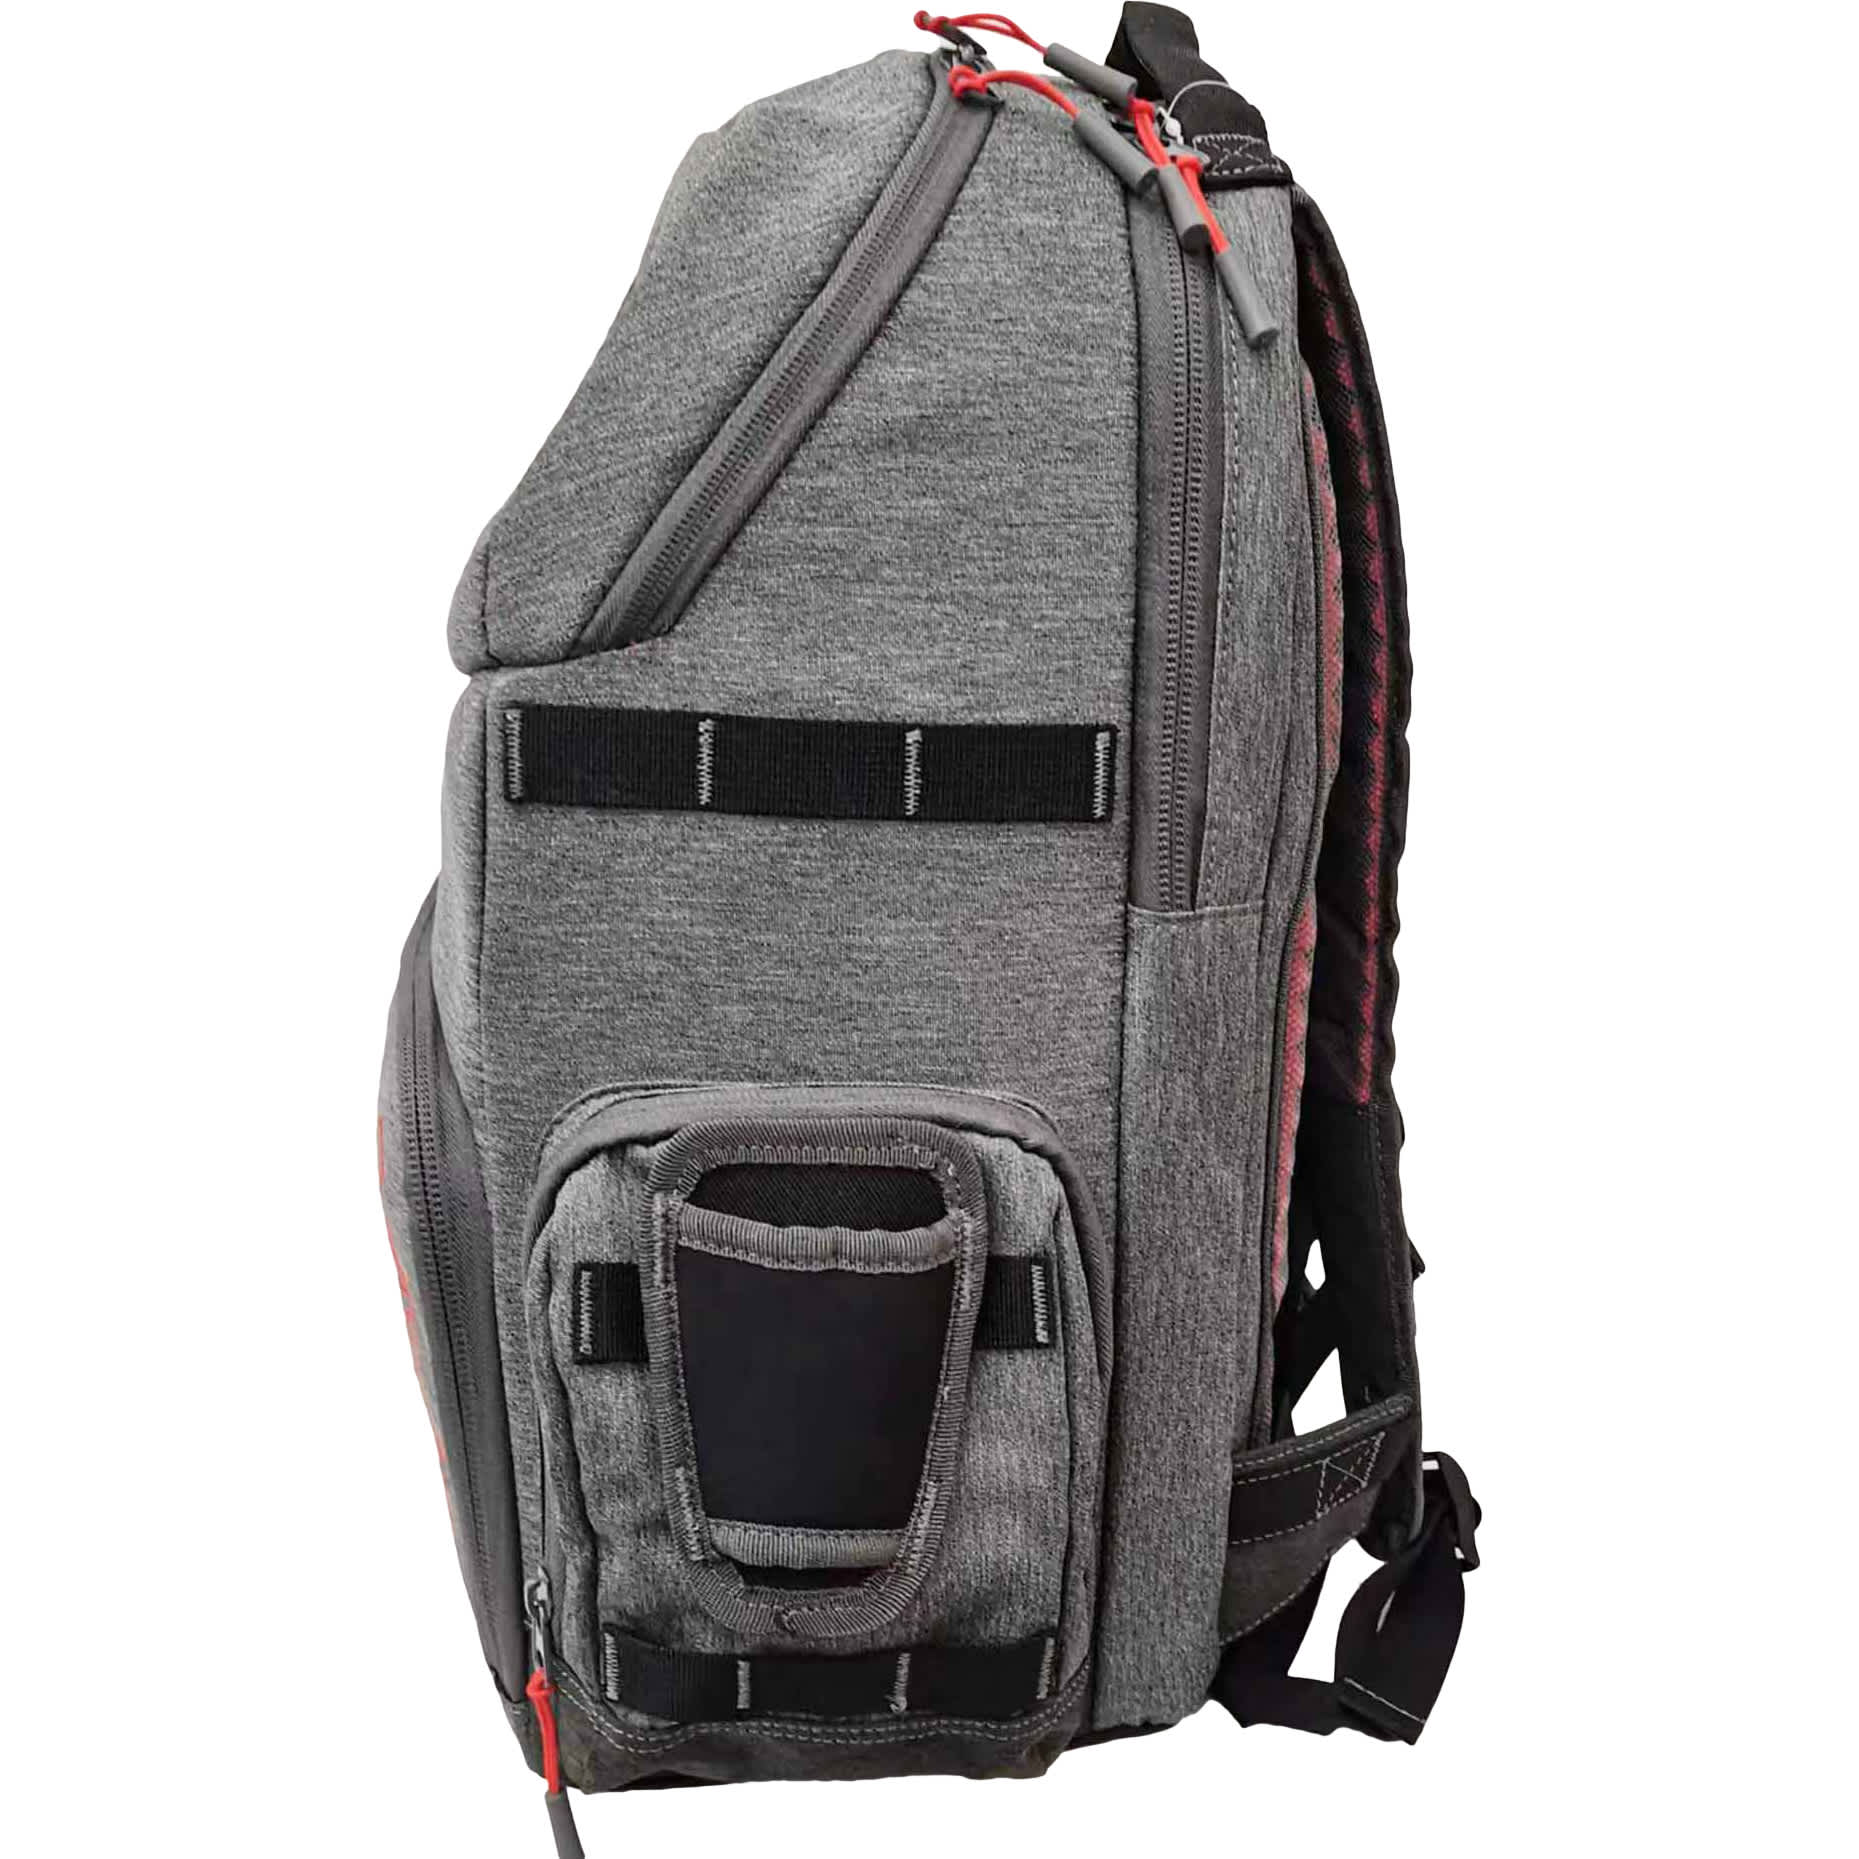 Bass Pro Shops® 4 Tray Prodigy Tackle Backpack